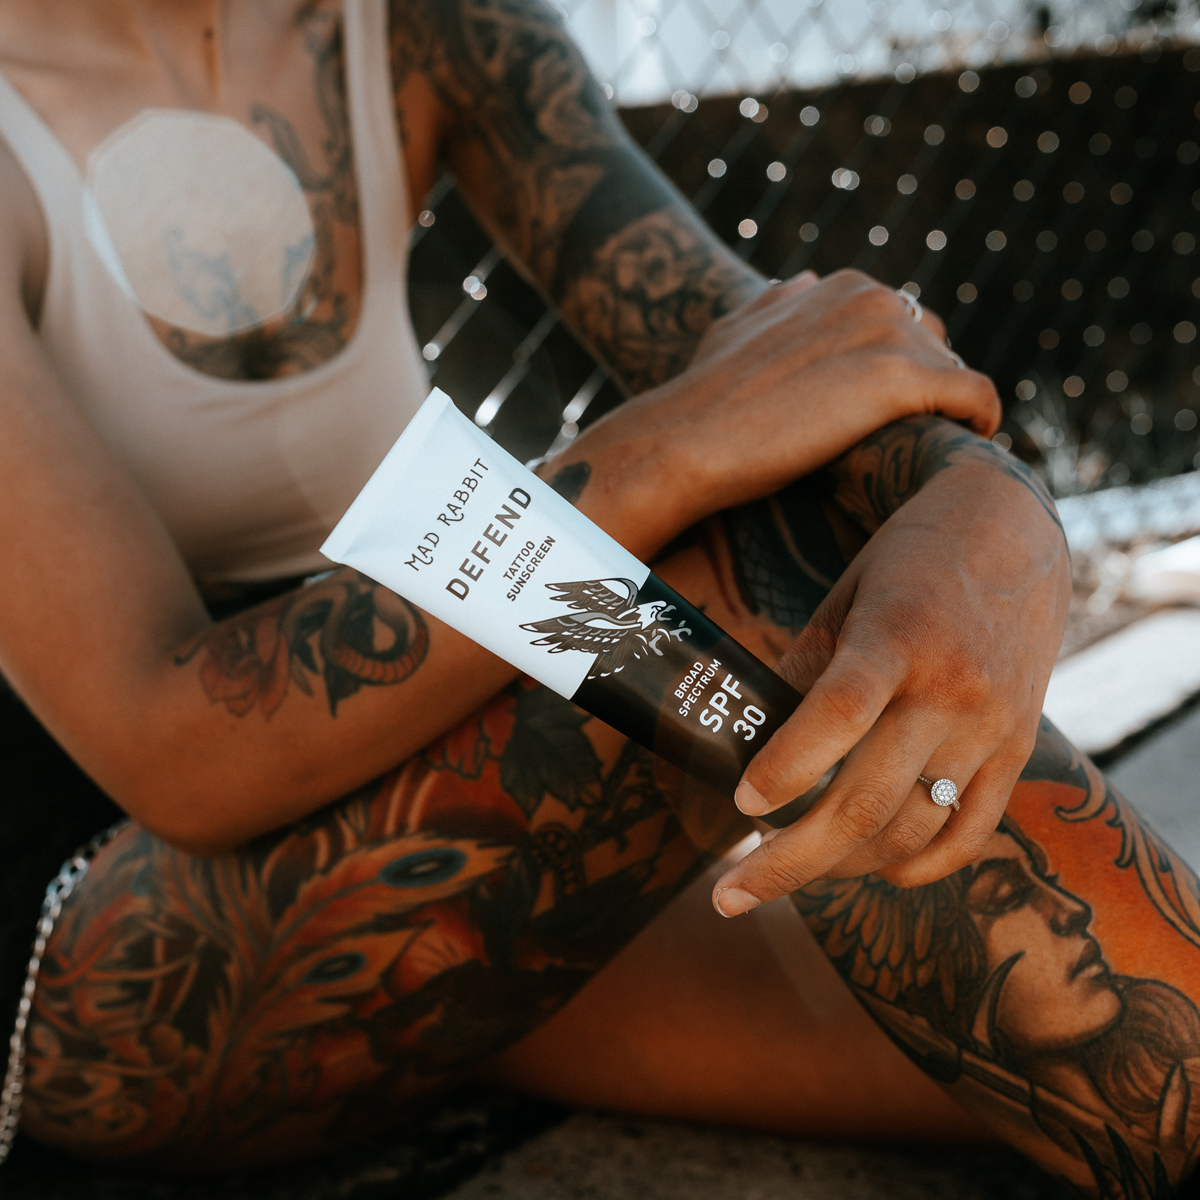 14 Best Sunscreens for Tattoos According to a Dermatologist